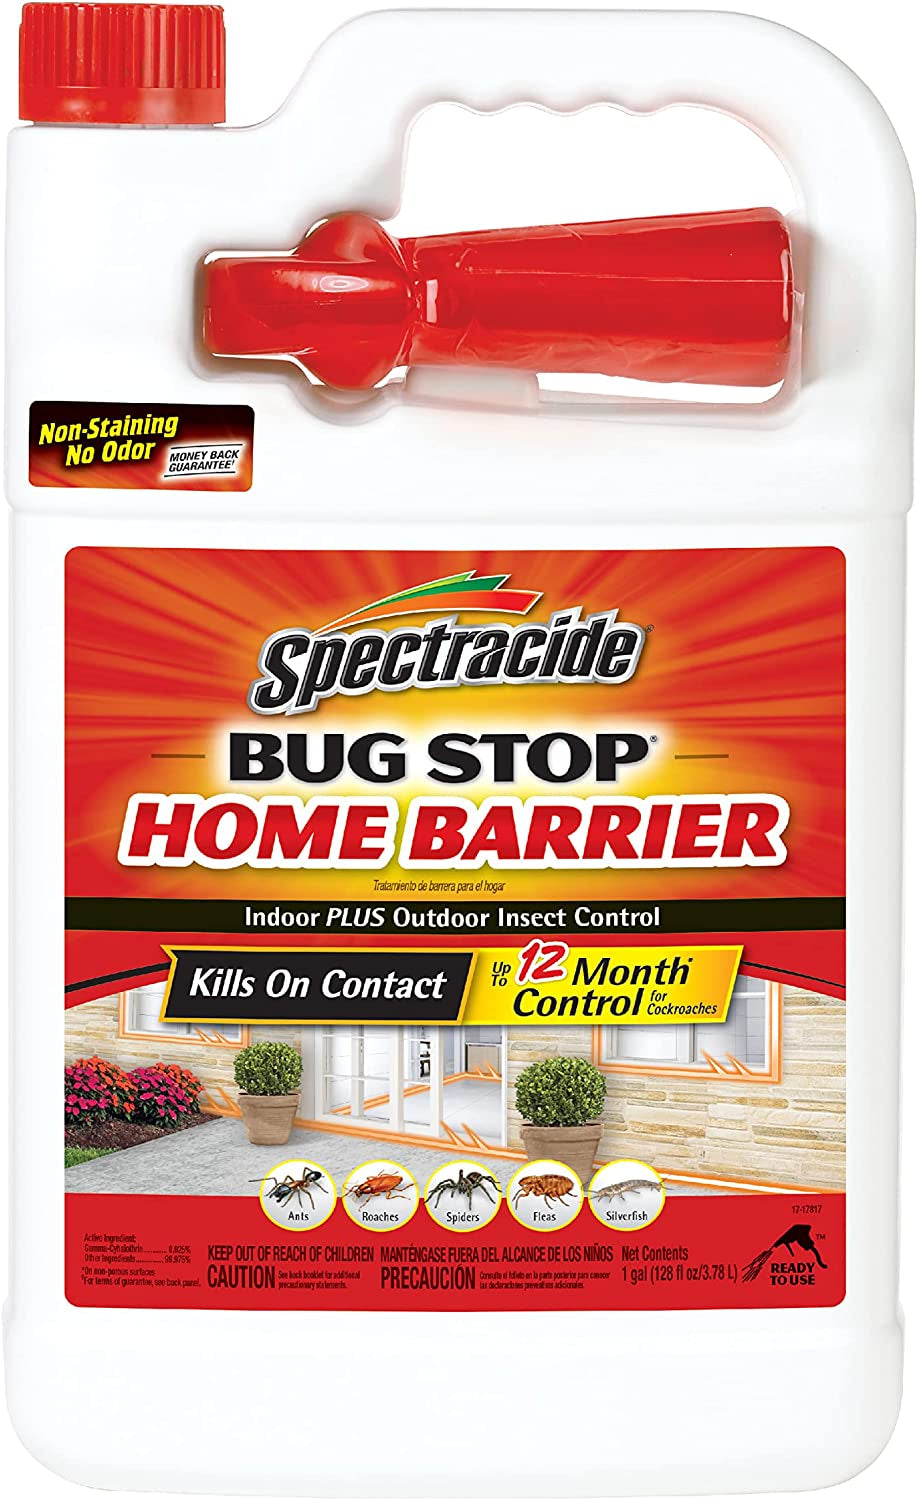 Spectracide Triazicide Insect Killer for Lawns Granules, 10 lb Bag